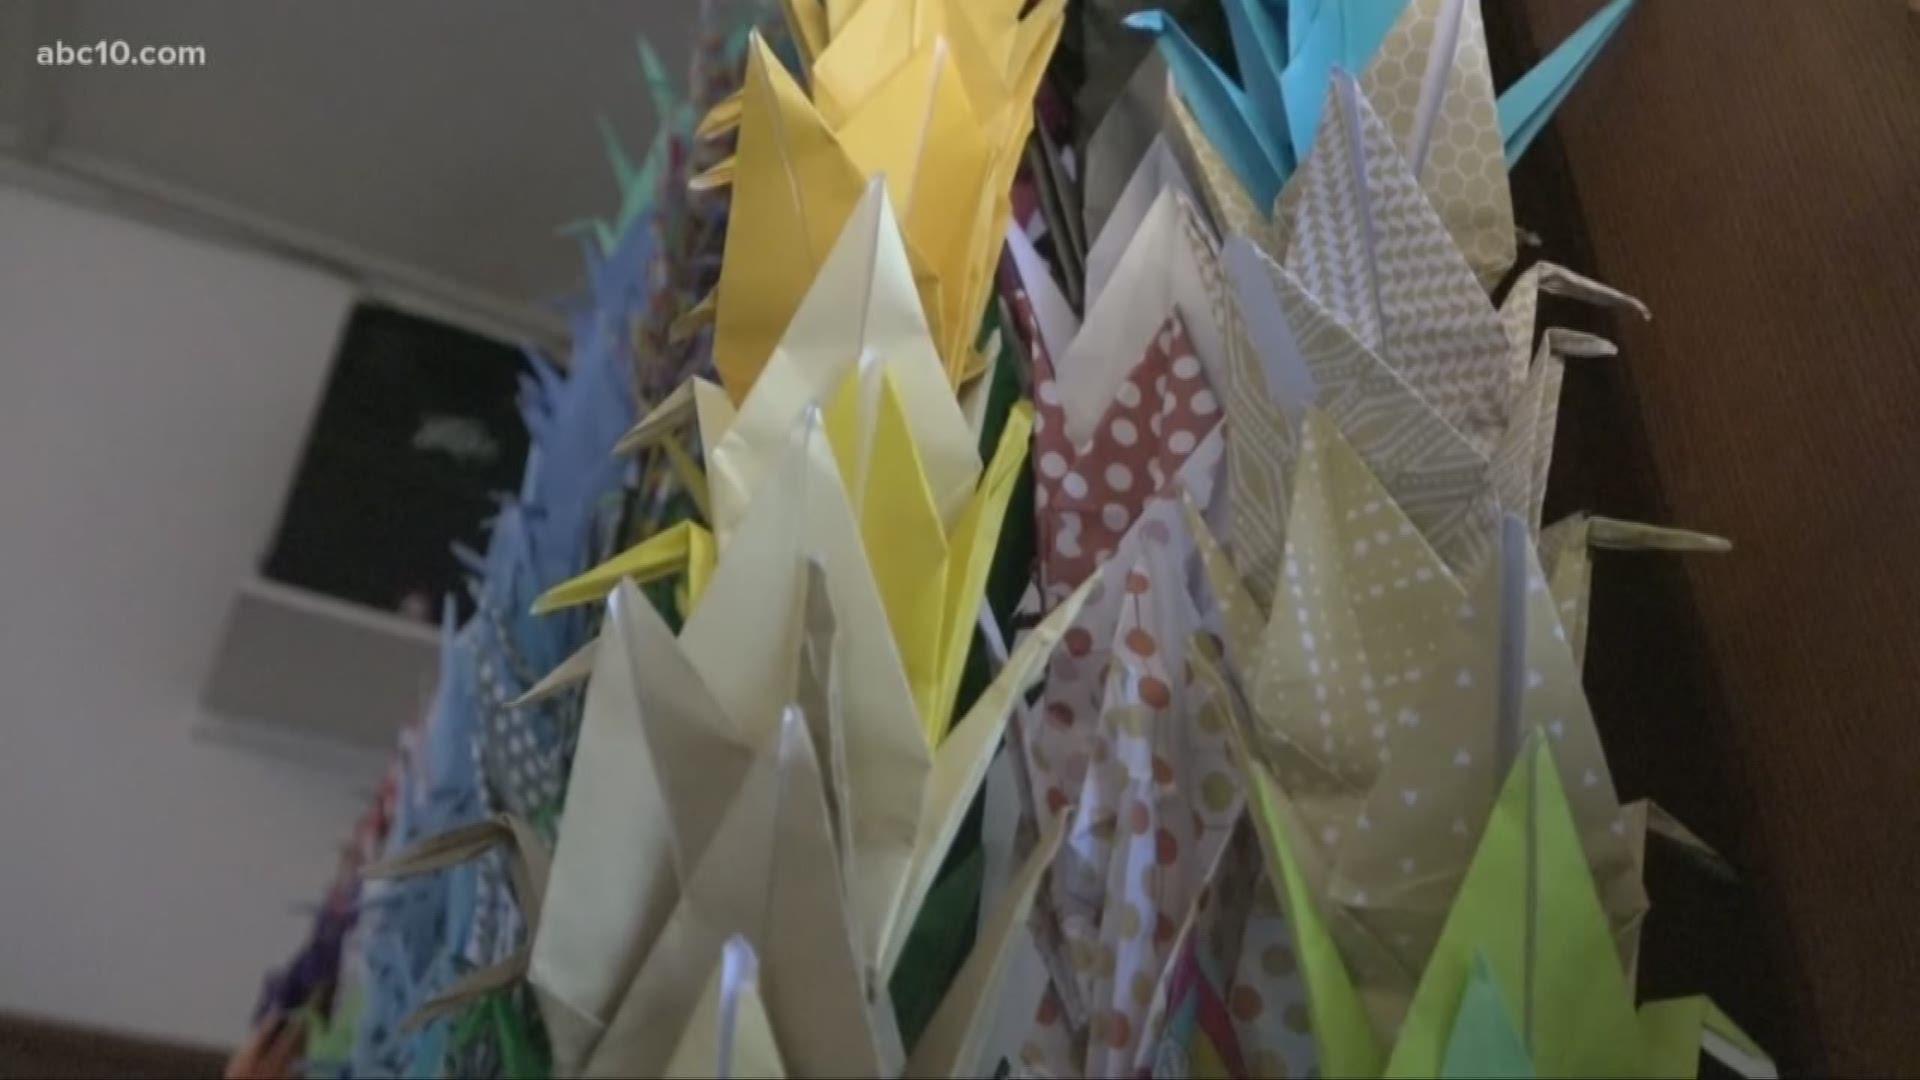 Parkview Presbyterian Church members created  paper cranes to support survivors of Japanese interment camps and immigrant families.